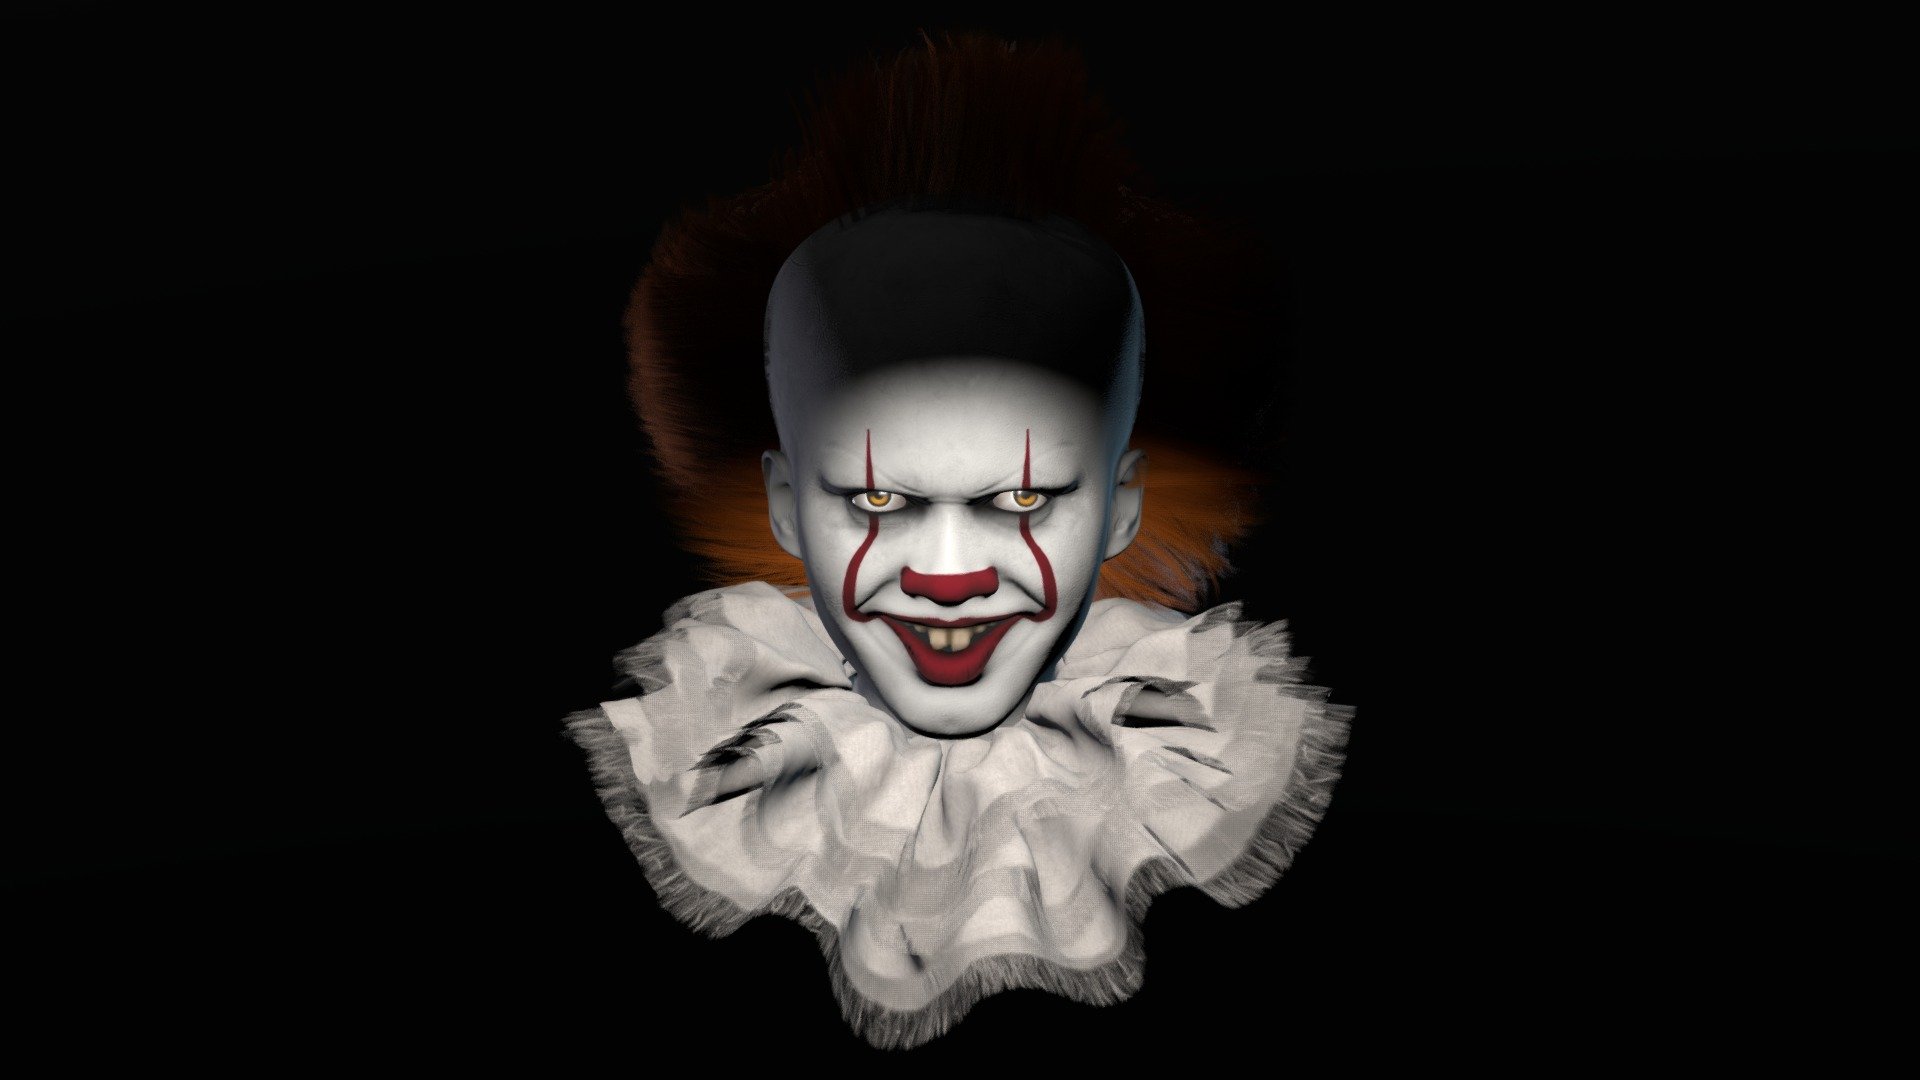 &ldquo;I`m pennywise the dancing clown